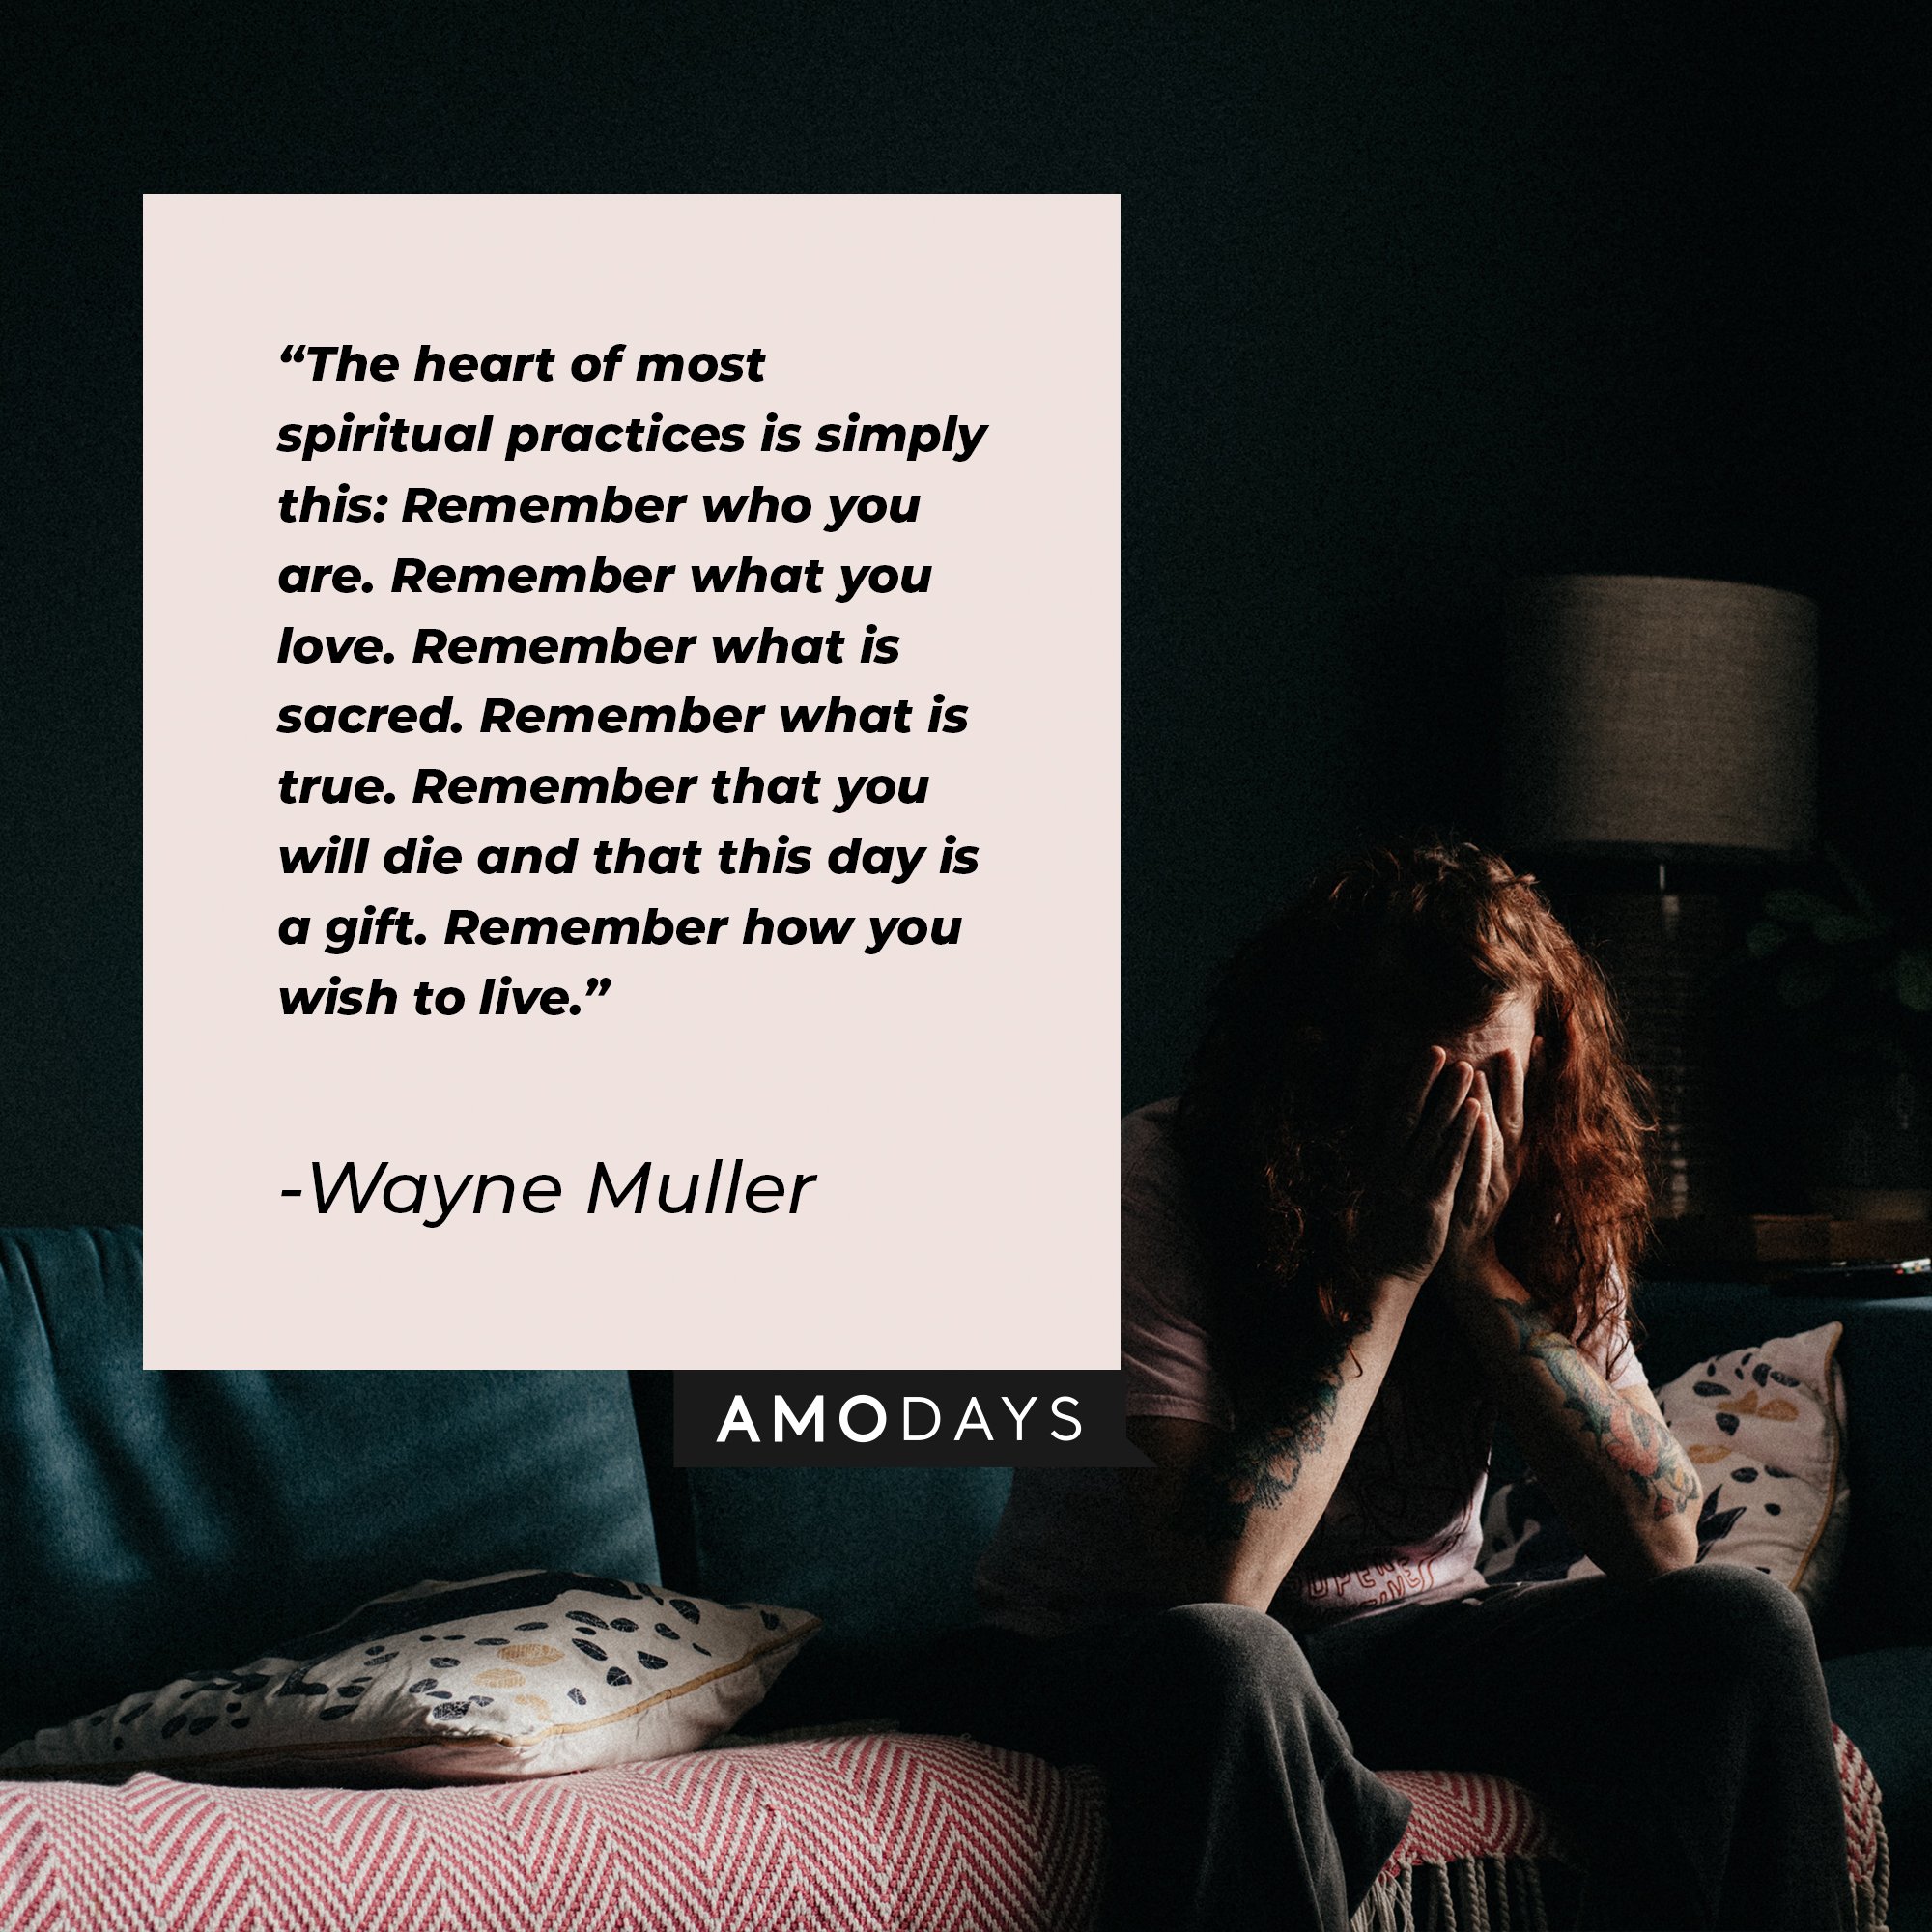 Wayne Muller’s quote: "The heart of most spiritual practices is simply this: Remember who you are. Remember what you love. Remember what is sacred. Remember what is true. Remember that you will die and that this day is a gift. Remember how you wish to live." | Image: AmoDays